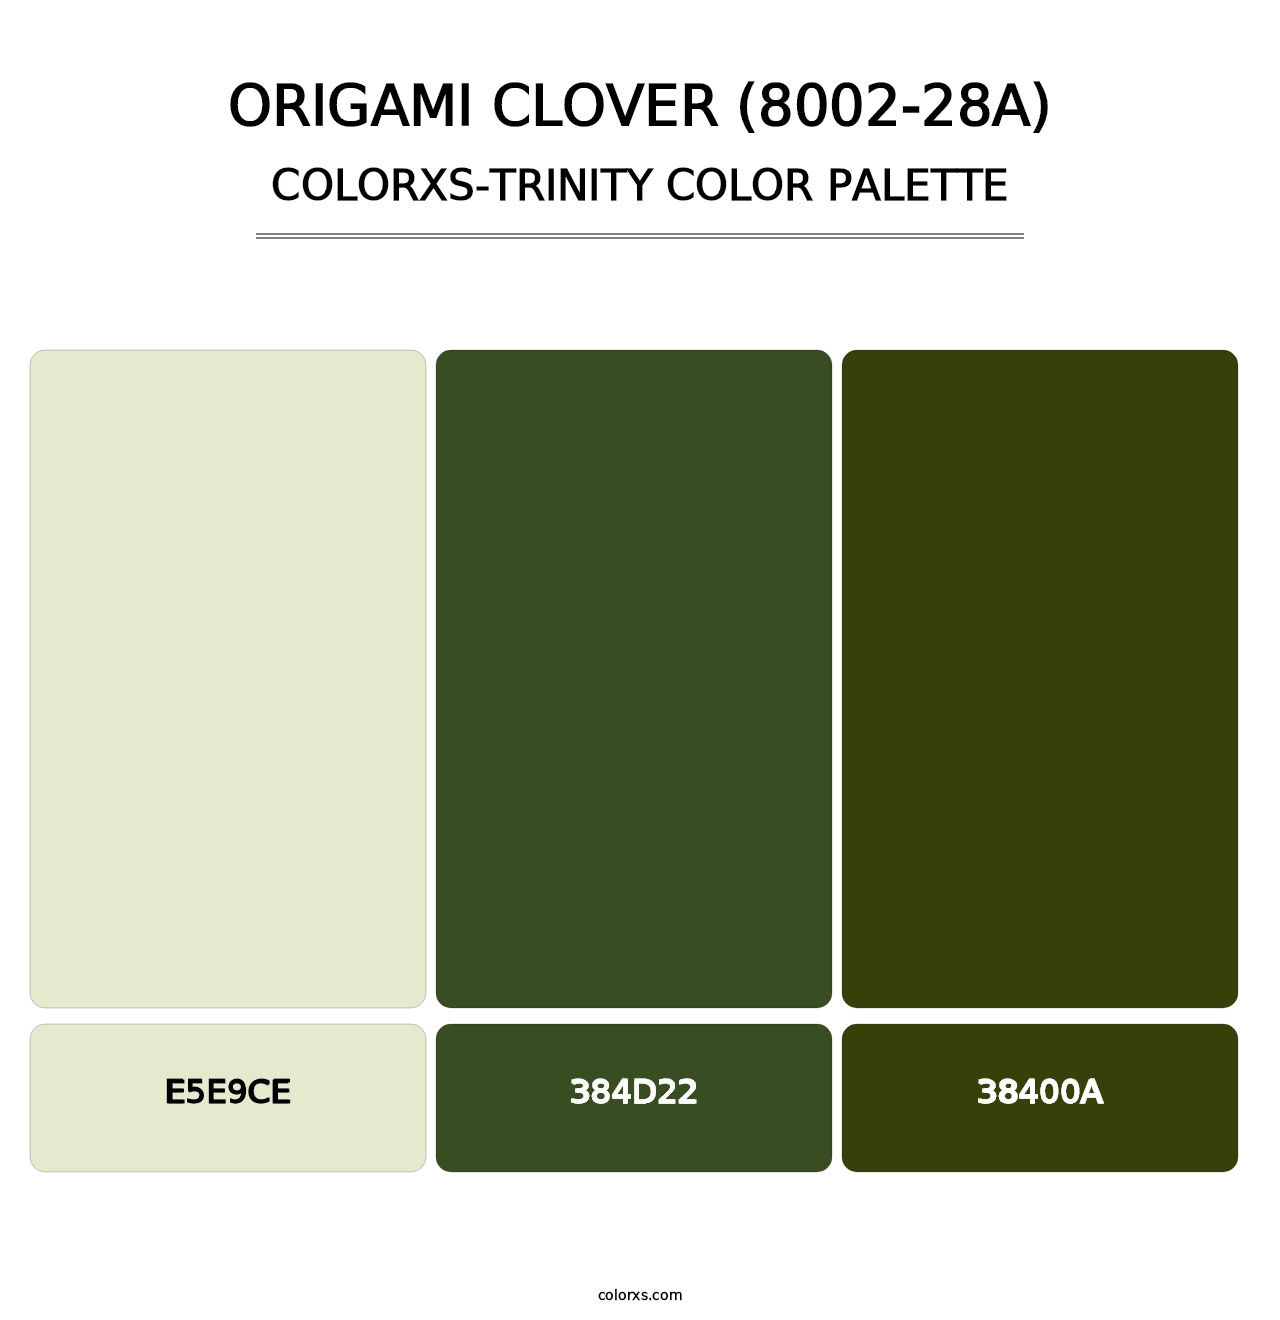 Origami Clover (8002-28A) - Colorxs Trinity Palette